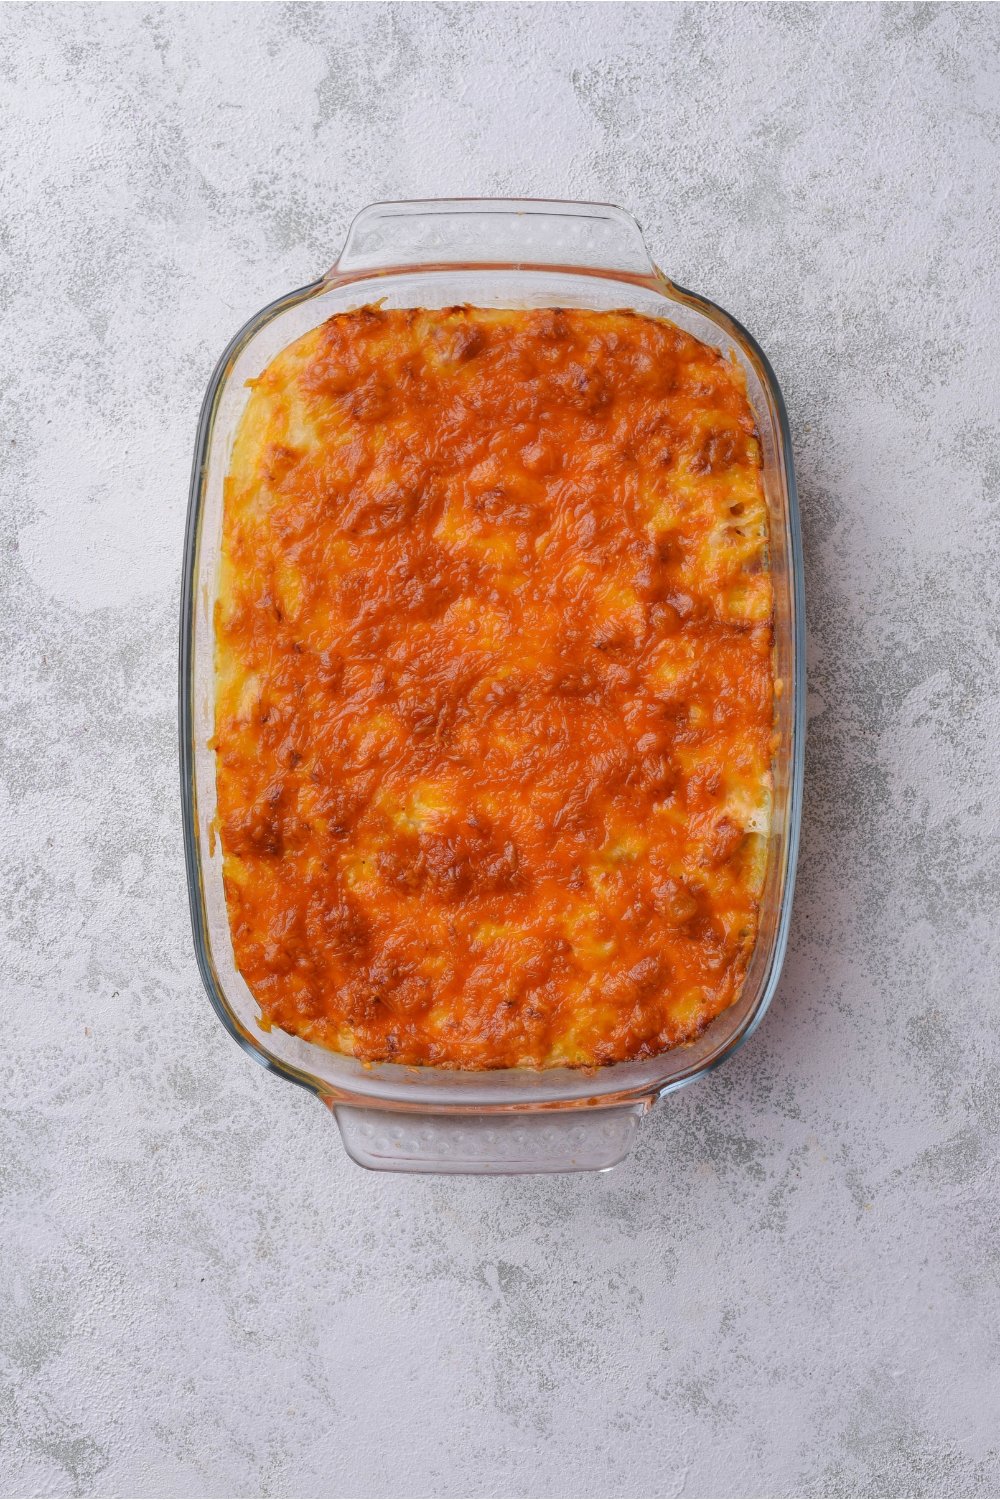 A casserole topped with melted cheese.